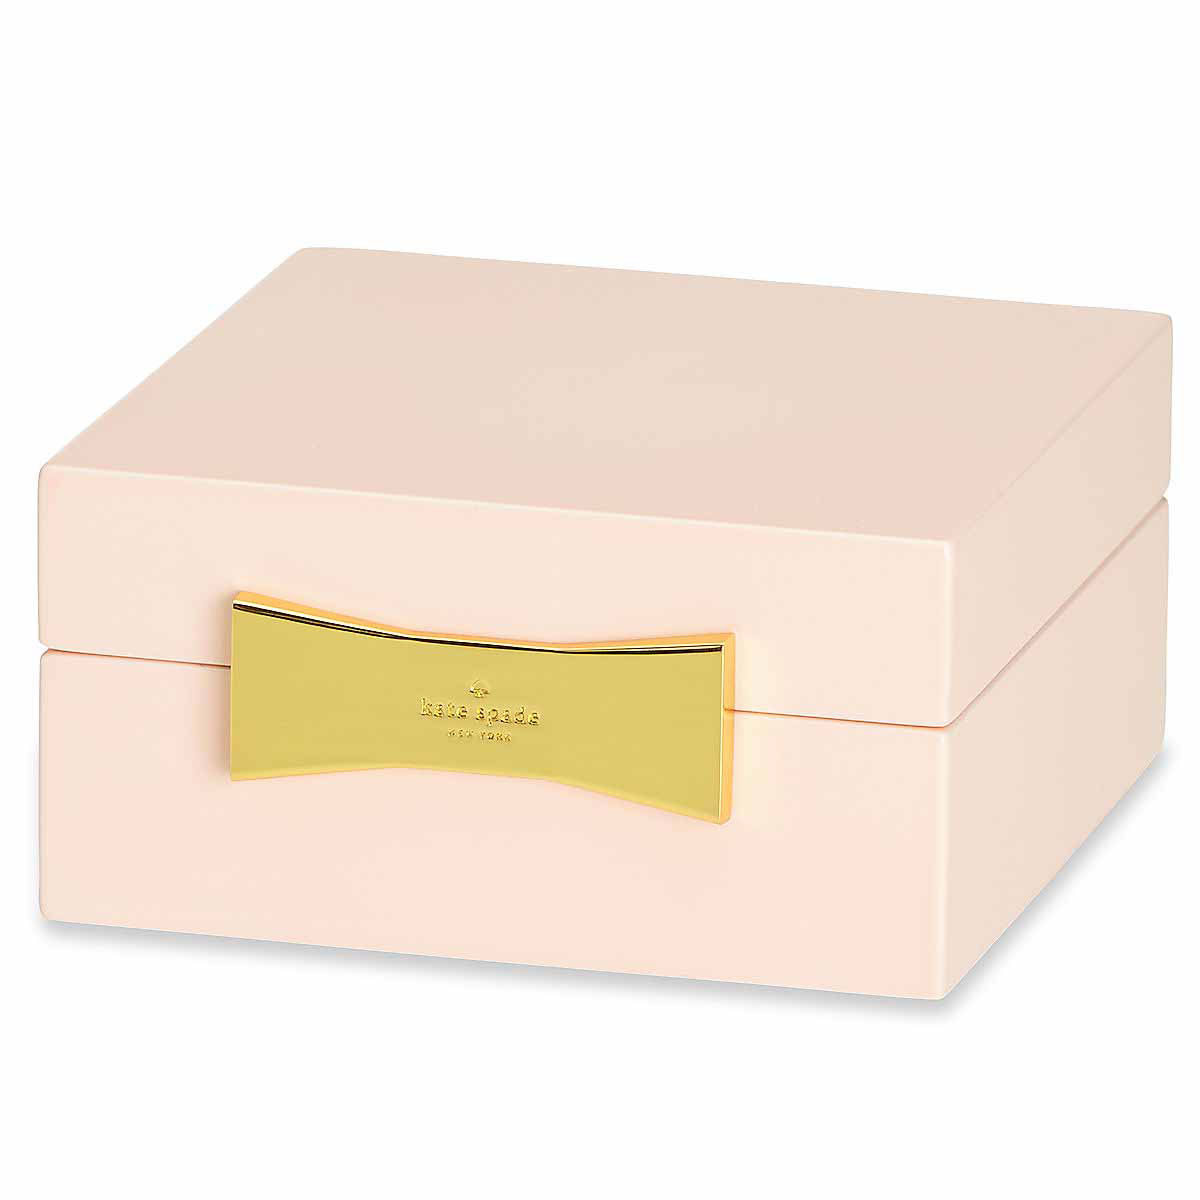 Kate Spade New York, Lenox Outpost Gifting Square Jewelry Box, Pink